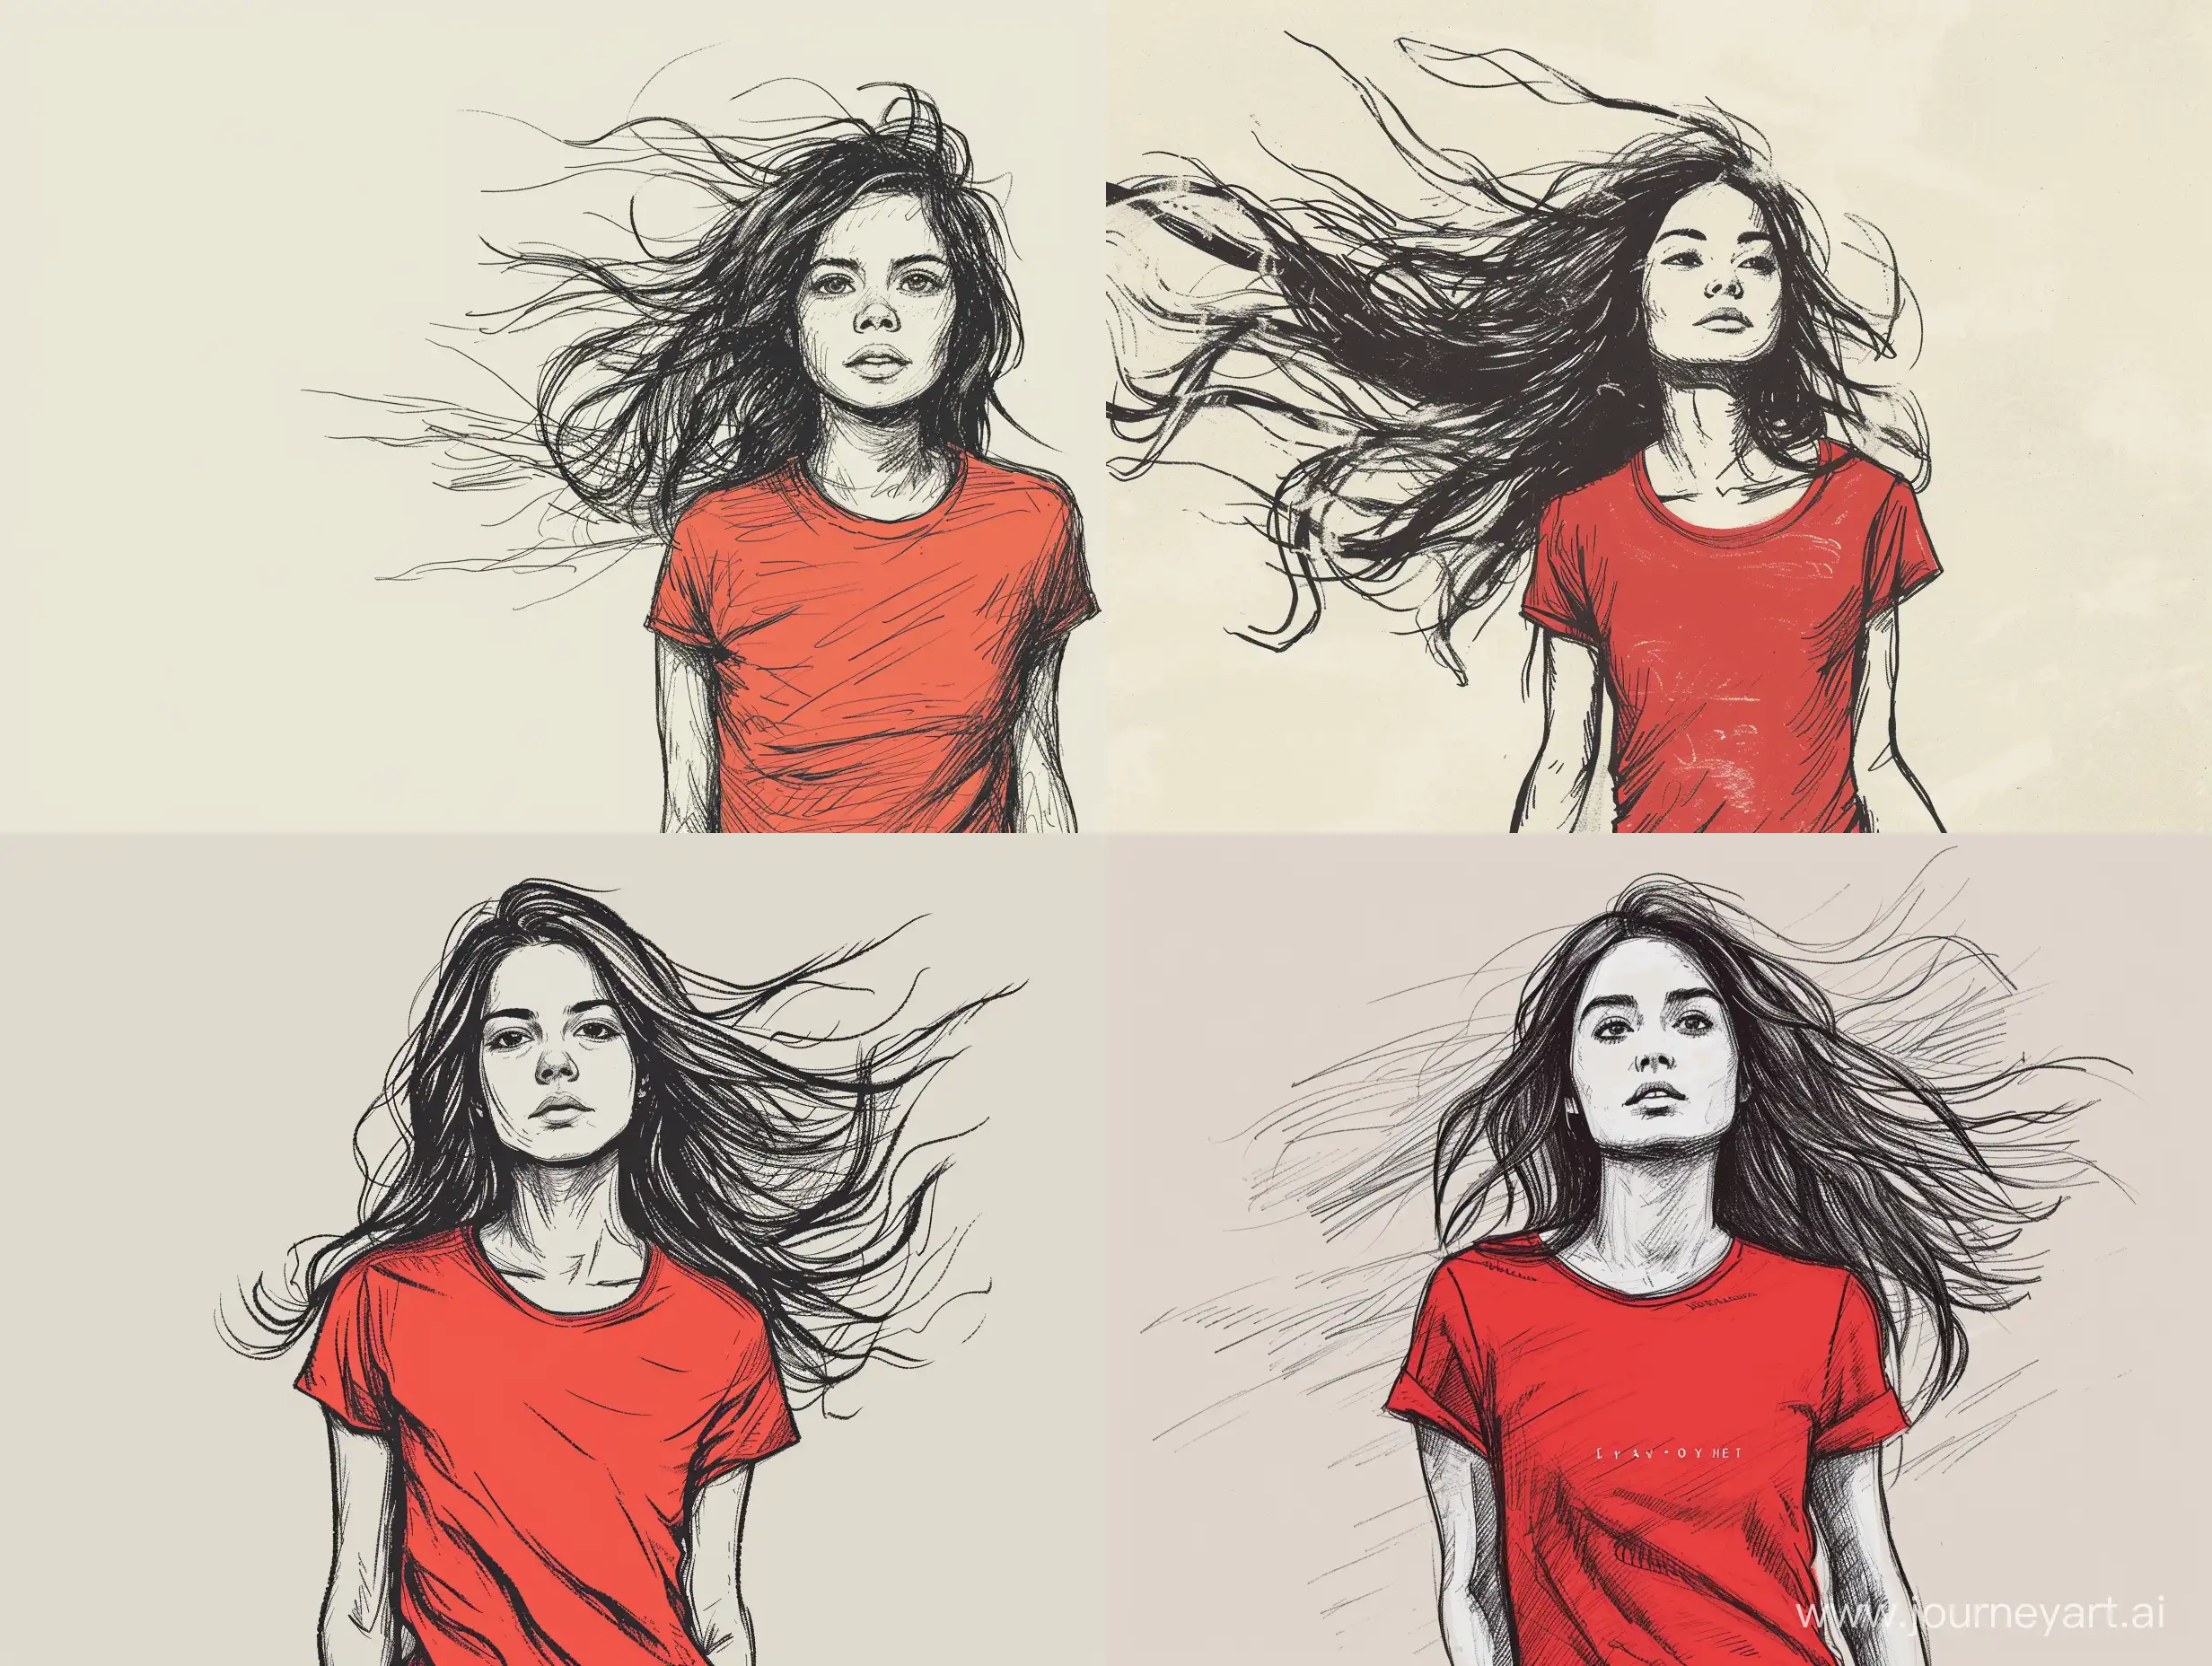 black pen illustration of a girl with flowing hair in a red t-shirt on a light grey background